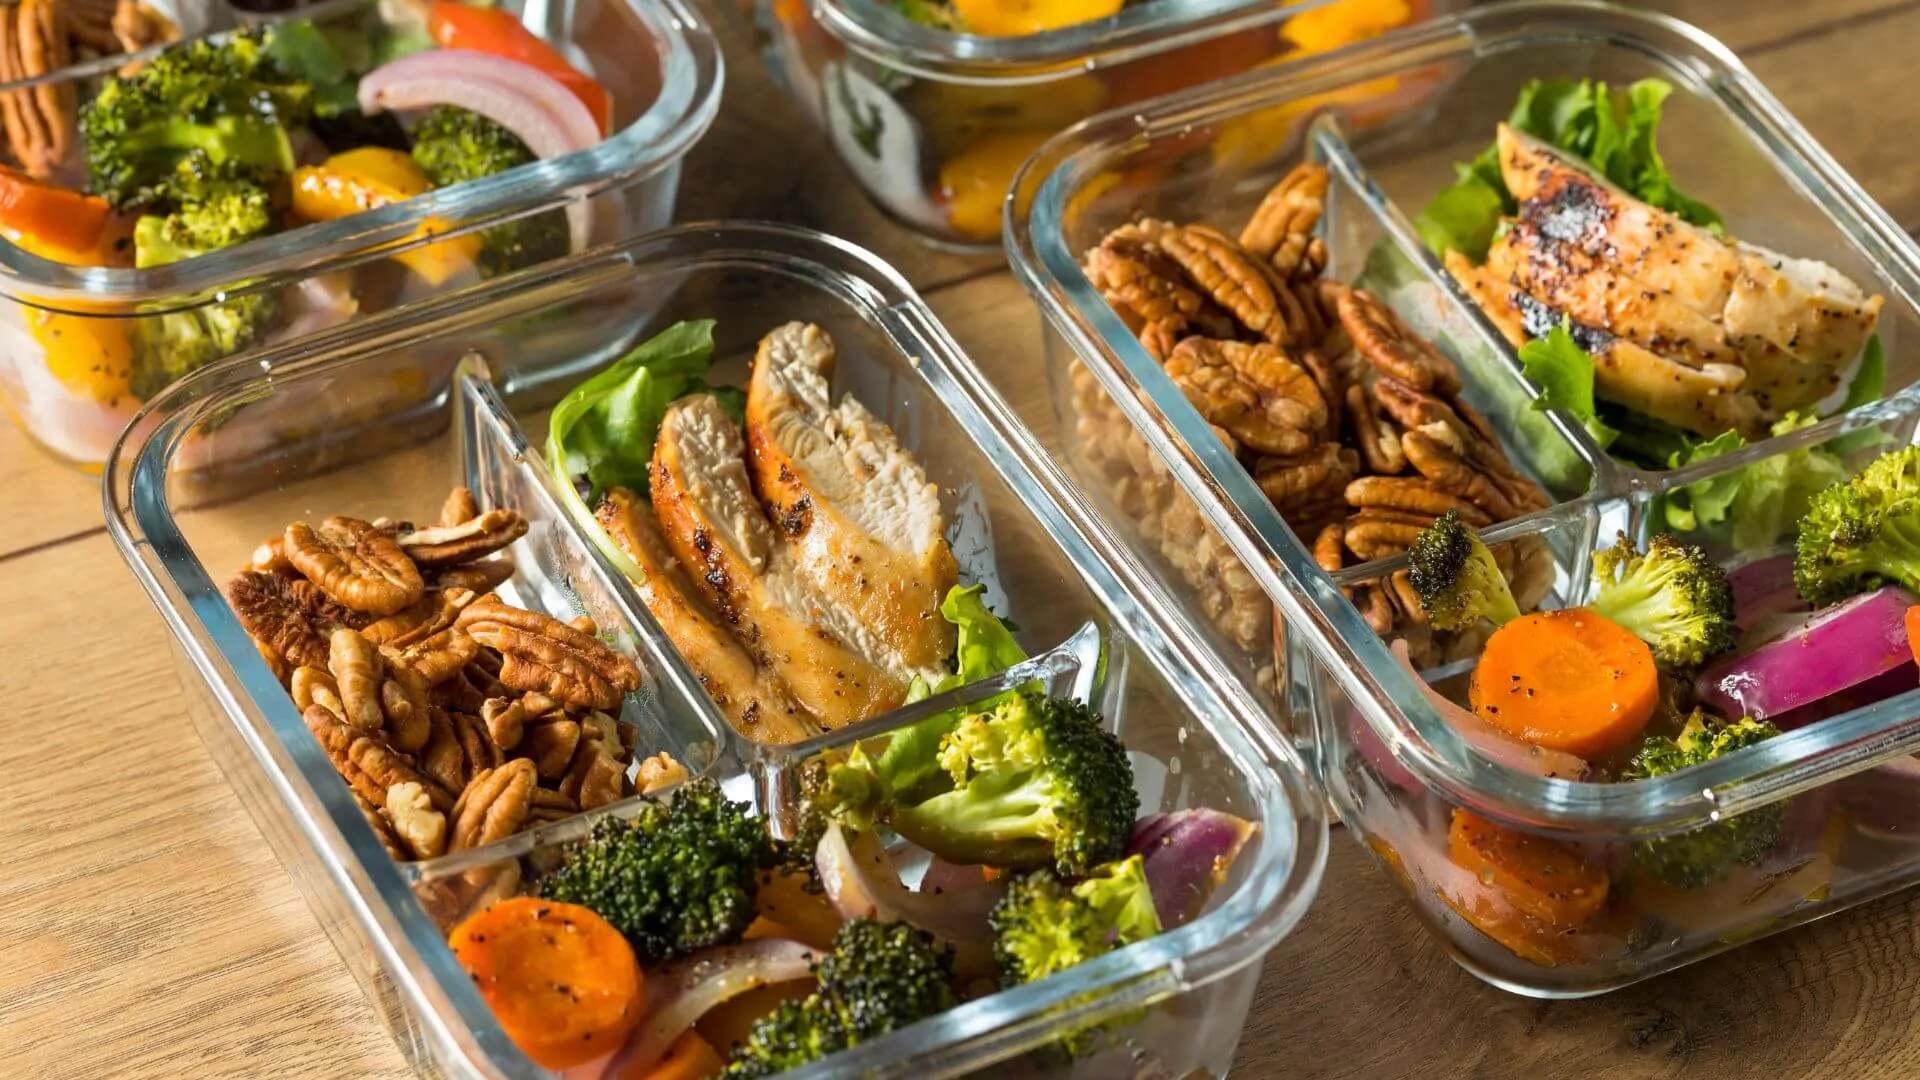 How to Get Started Meal Prepping